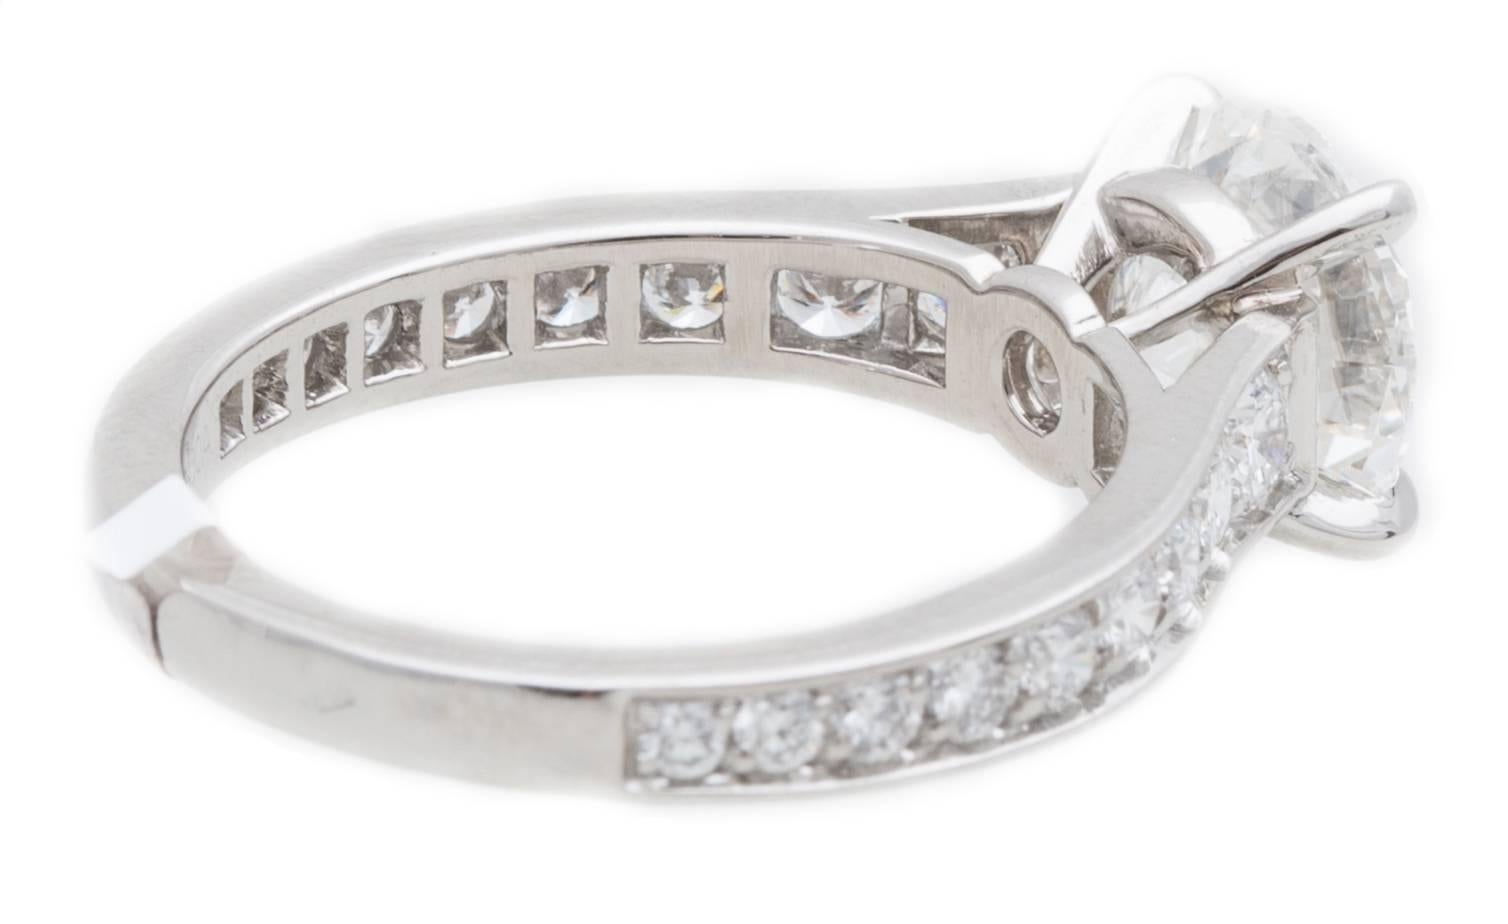 Cartier 1.70 carat GIA Certified Diamond Platinum Ring In Excellent Condition For Sale In Sunny Isles Beach, FL